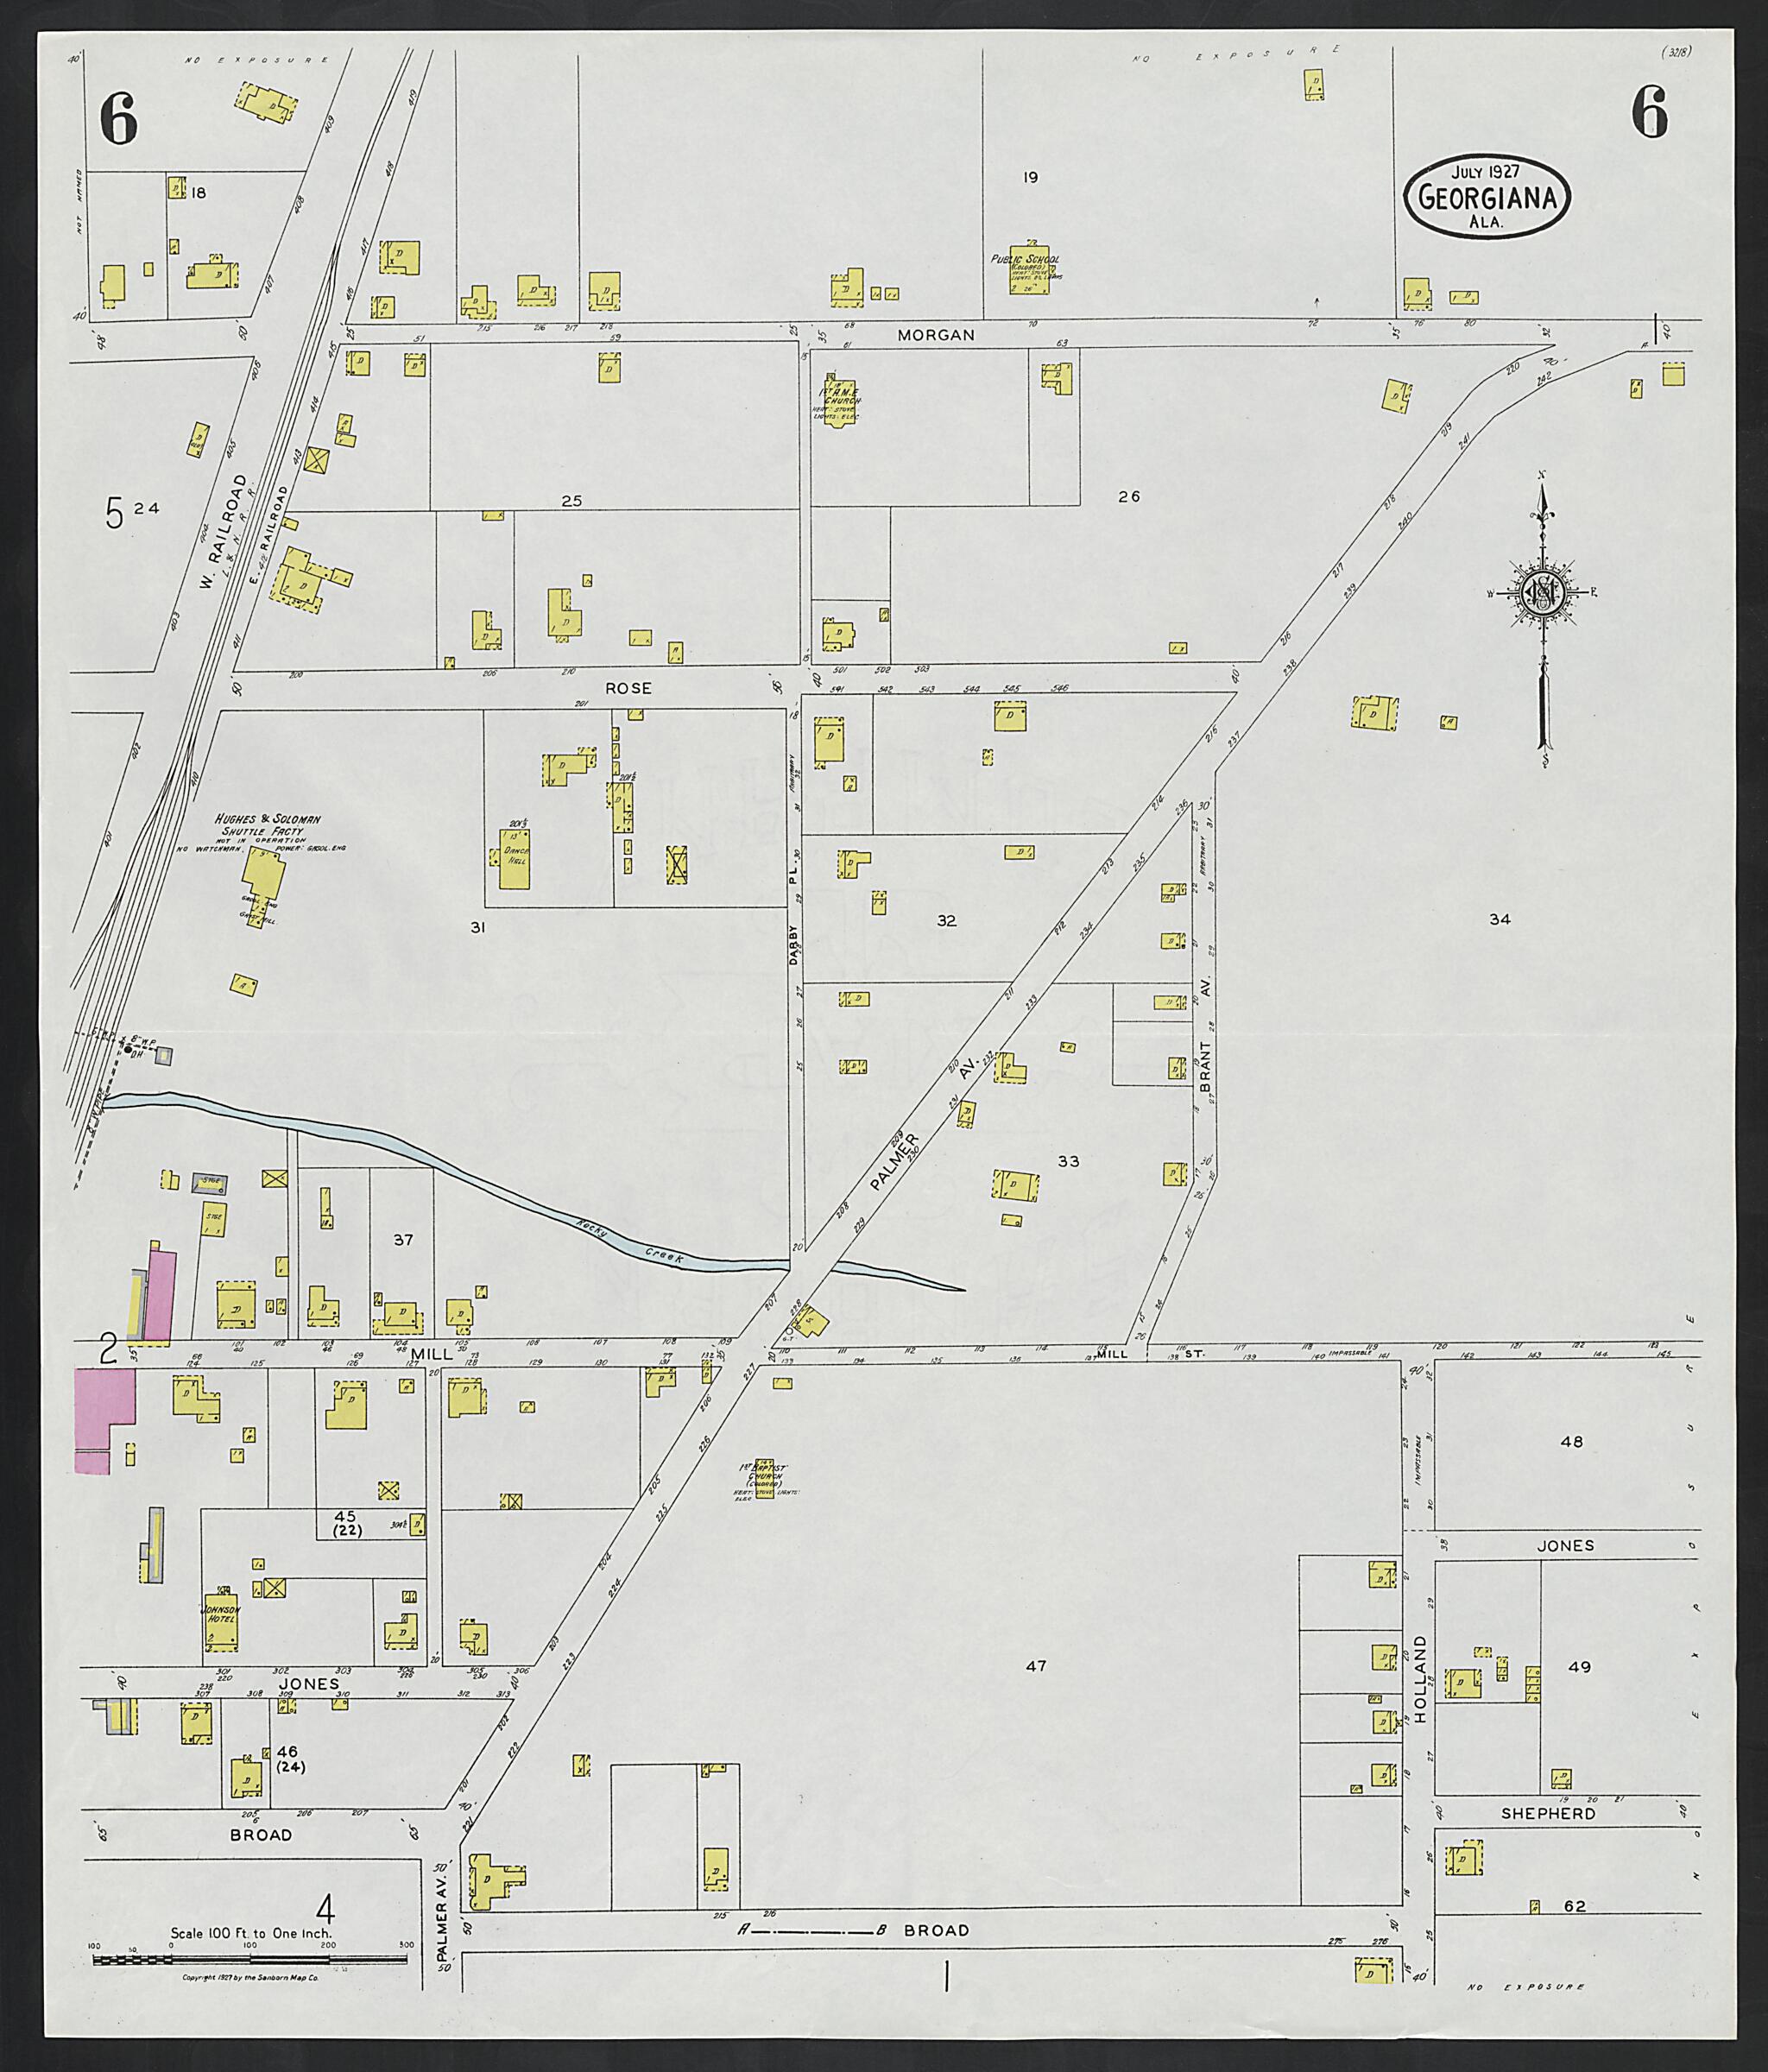 This old map of Georgiana, Butler County, Alabama was created by Sanborn Map Company in 1927